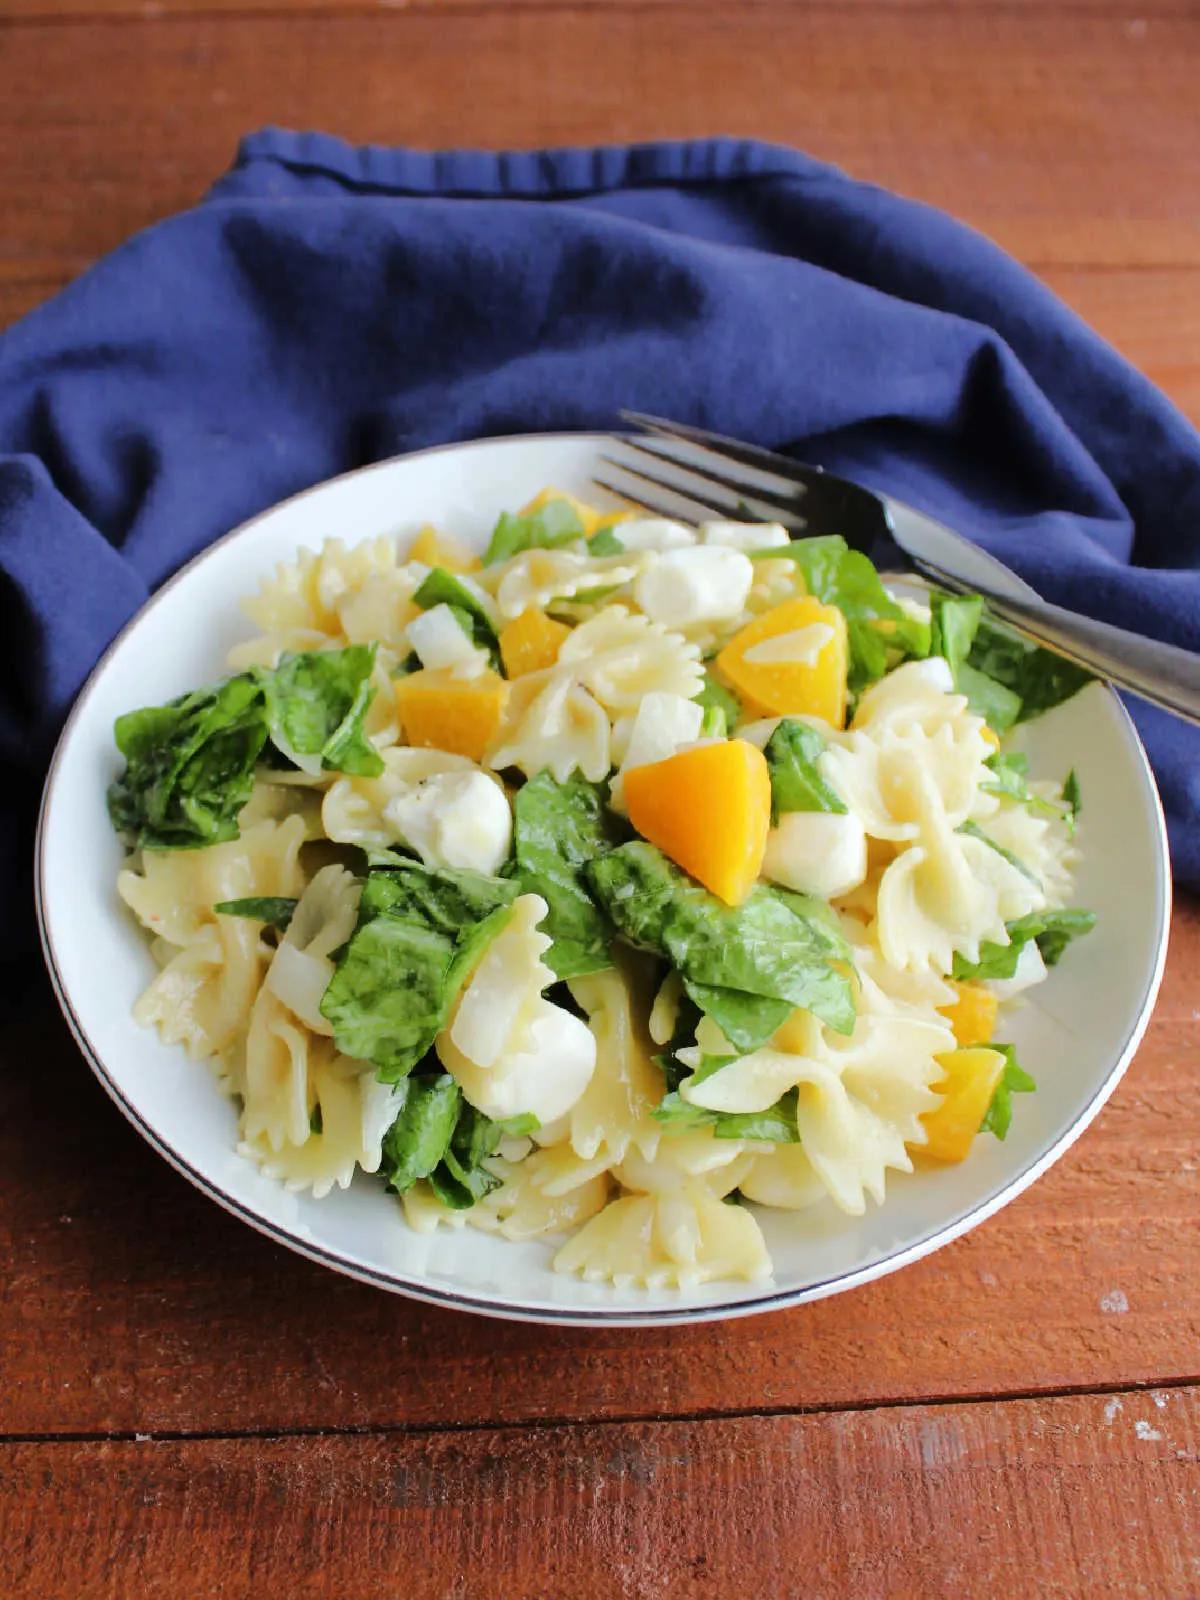 Bowl of peach pasta salad with spinach, ready to eat.